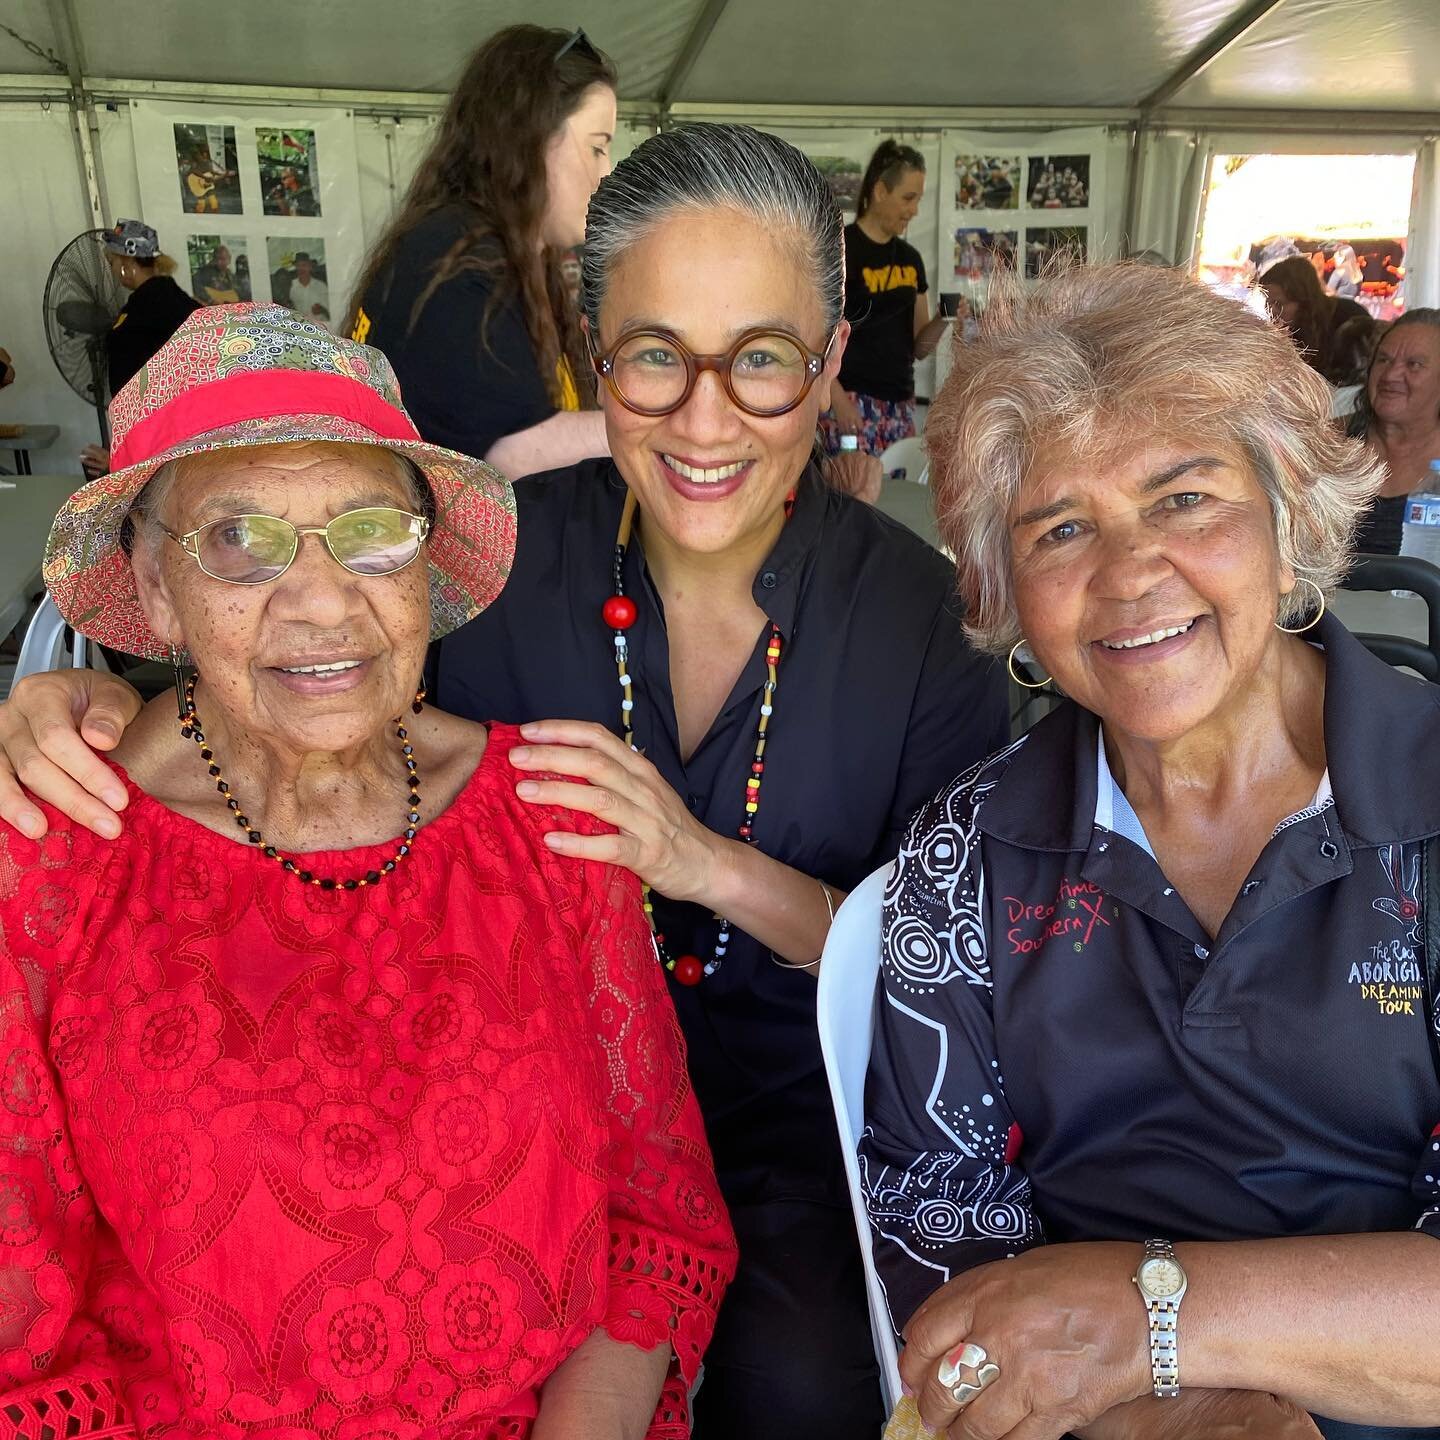 LUCKY LOVES YABUN FESTIVAL | &lsquo;Celebrate Survival &hellip; Resist Invasion &hellip; Continue Culture &hellip;&rsquo; 

🖤💛❤️✊🏾
January 26

&lsquo;Yabun Festival is the largest one-day gathering and recognition of Aboriginal and Torres Strait I